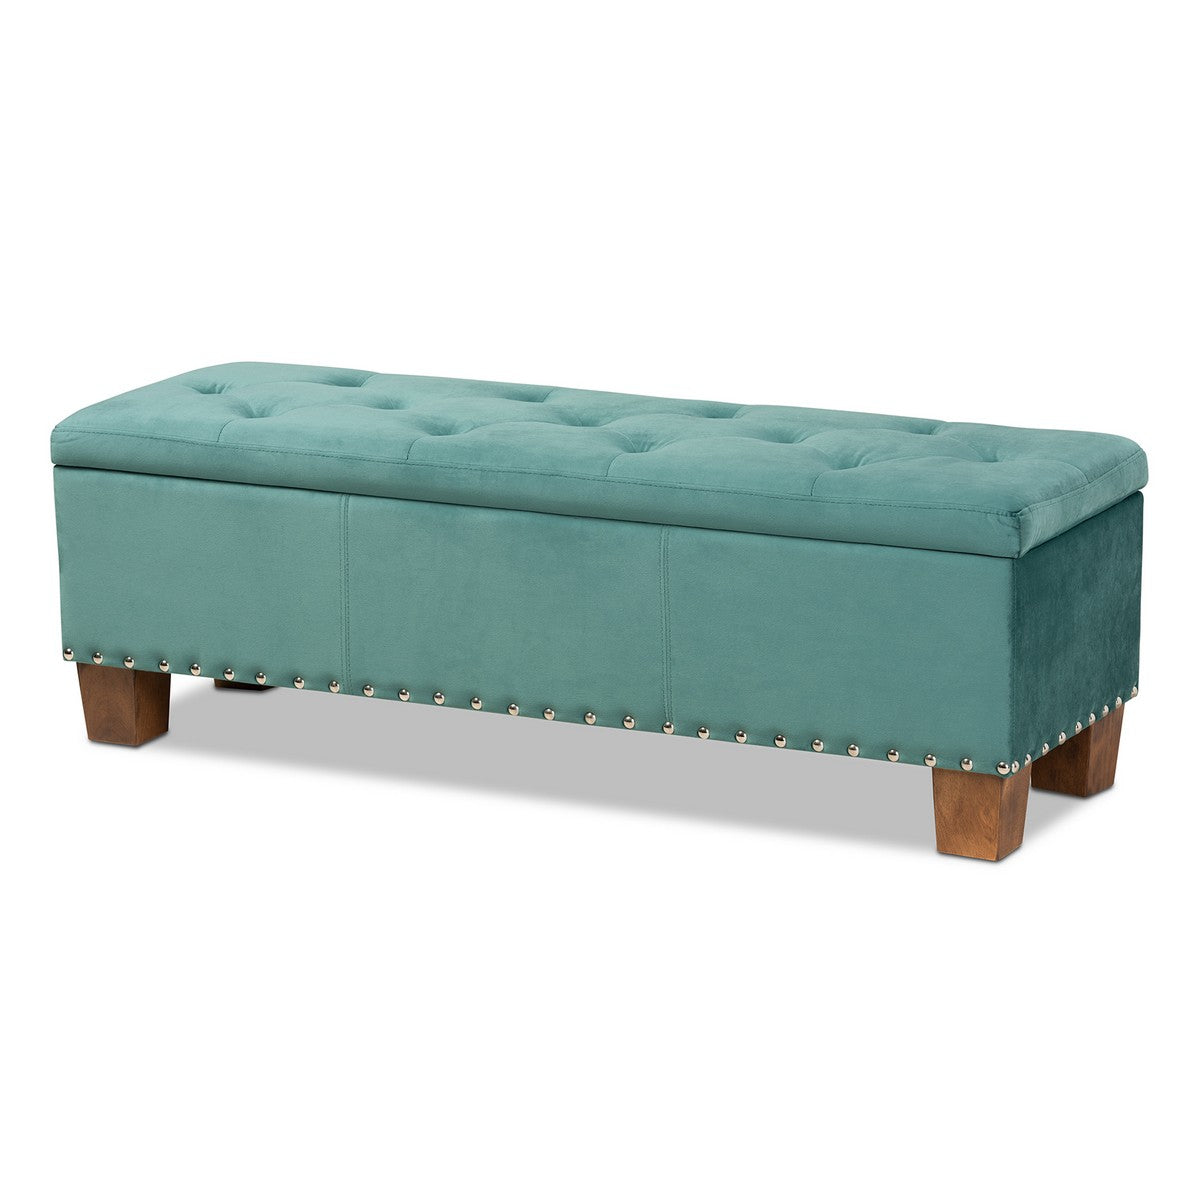 Baxton Studio Hannah Modern and Contemporary Teal Blue Velvet Fabric Upholstered Button-Tufted Storage Ottoman Bench Baxton Studio- Ottomans-Minimal And Modern - 1